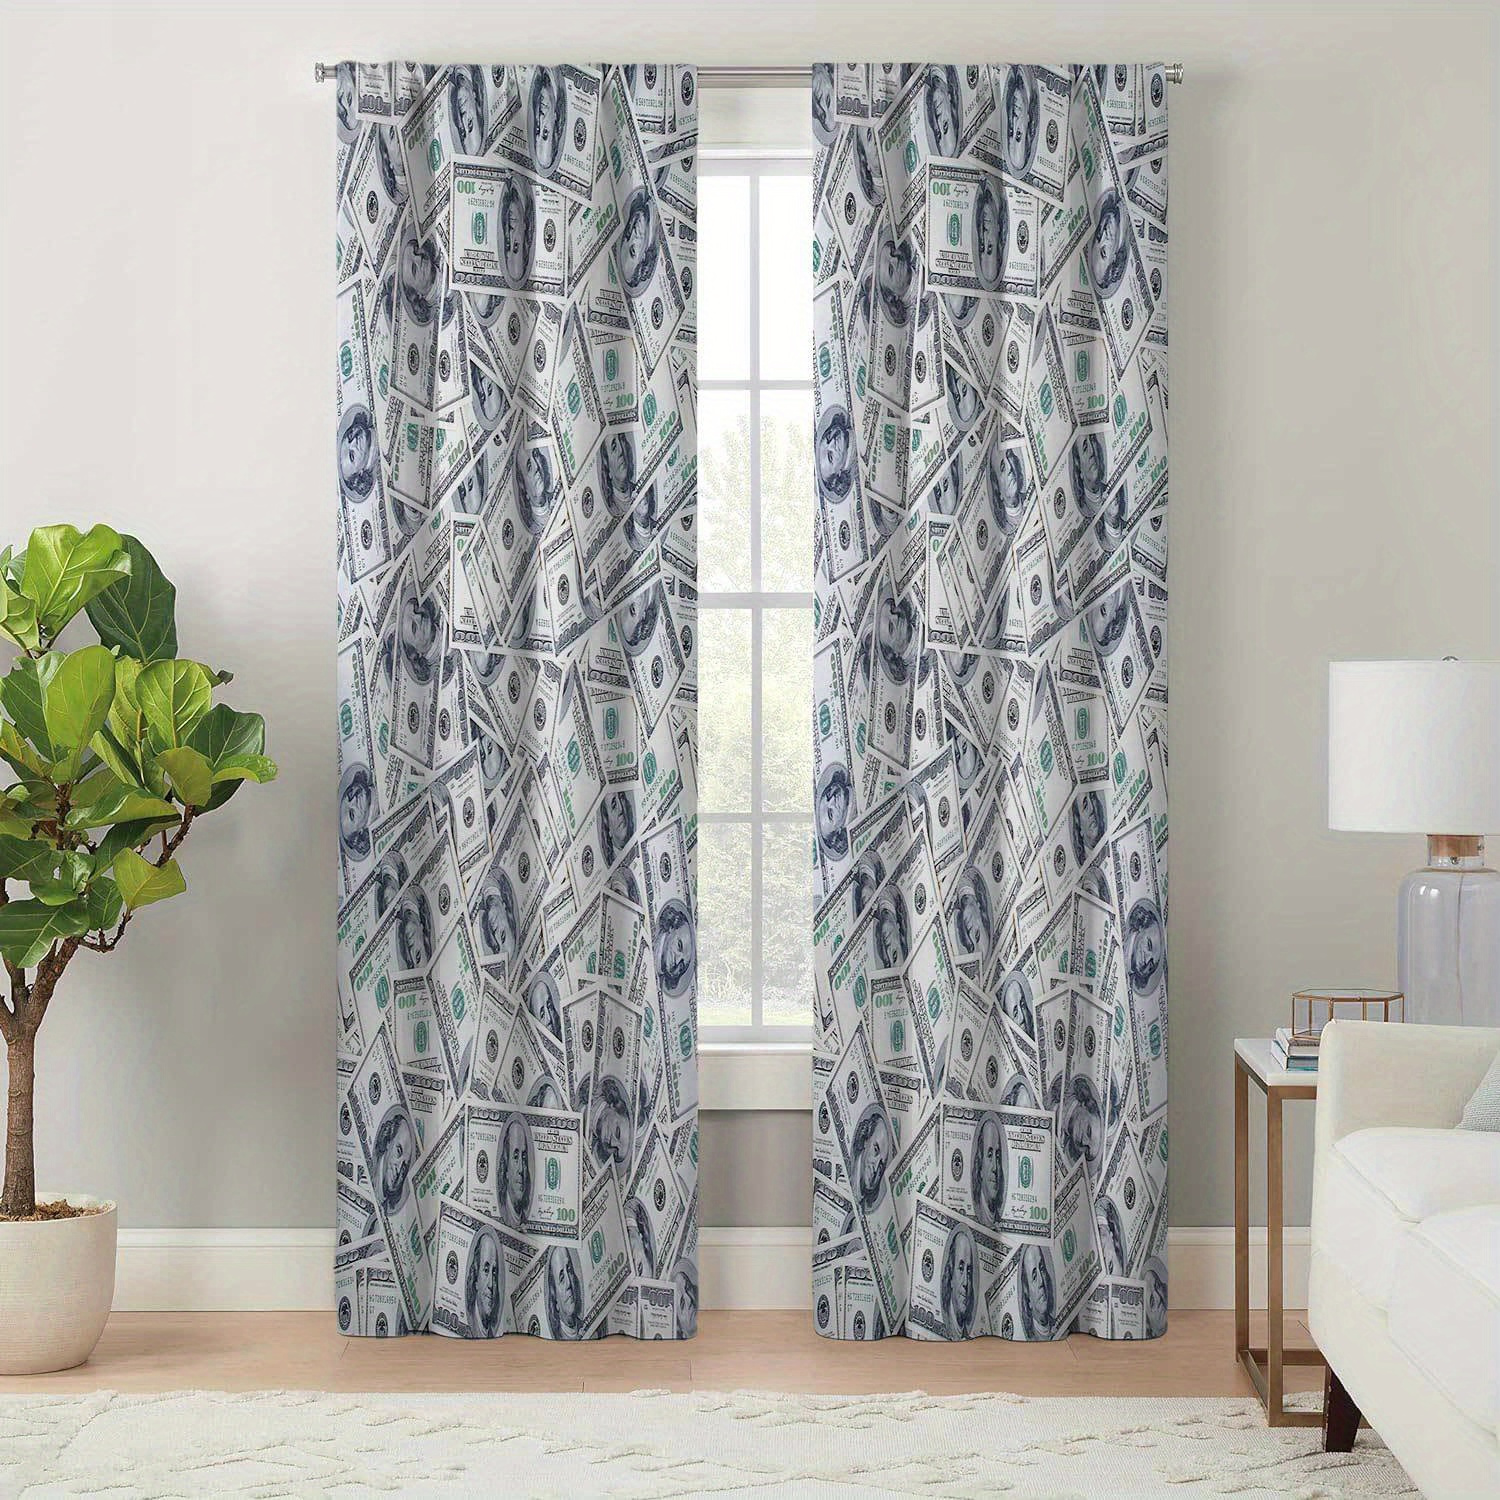 

2pcs, Dollar Bill Print Blackout Curtains For Living Room And Bedroom, Modern Minimalist Style, Easy Care, All-season Charm, Durable & Easy To Hang, Bohemian